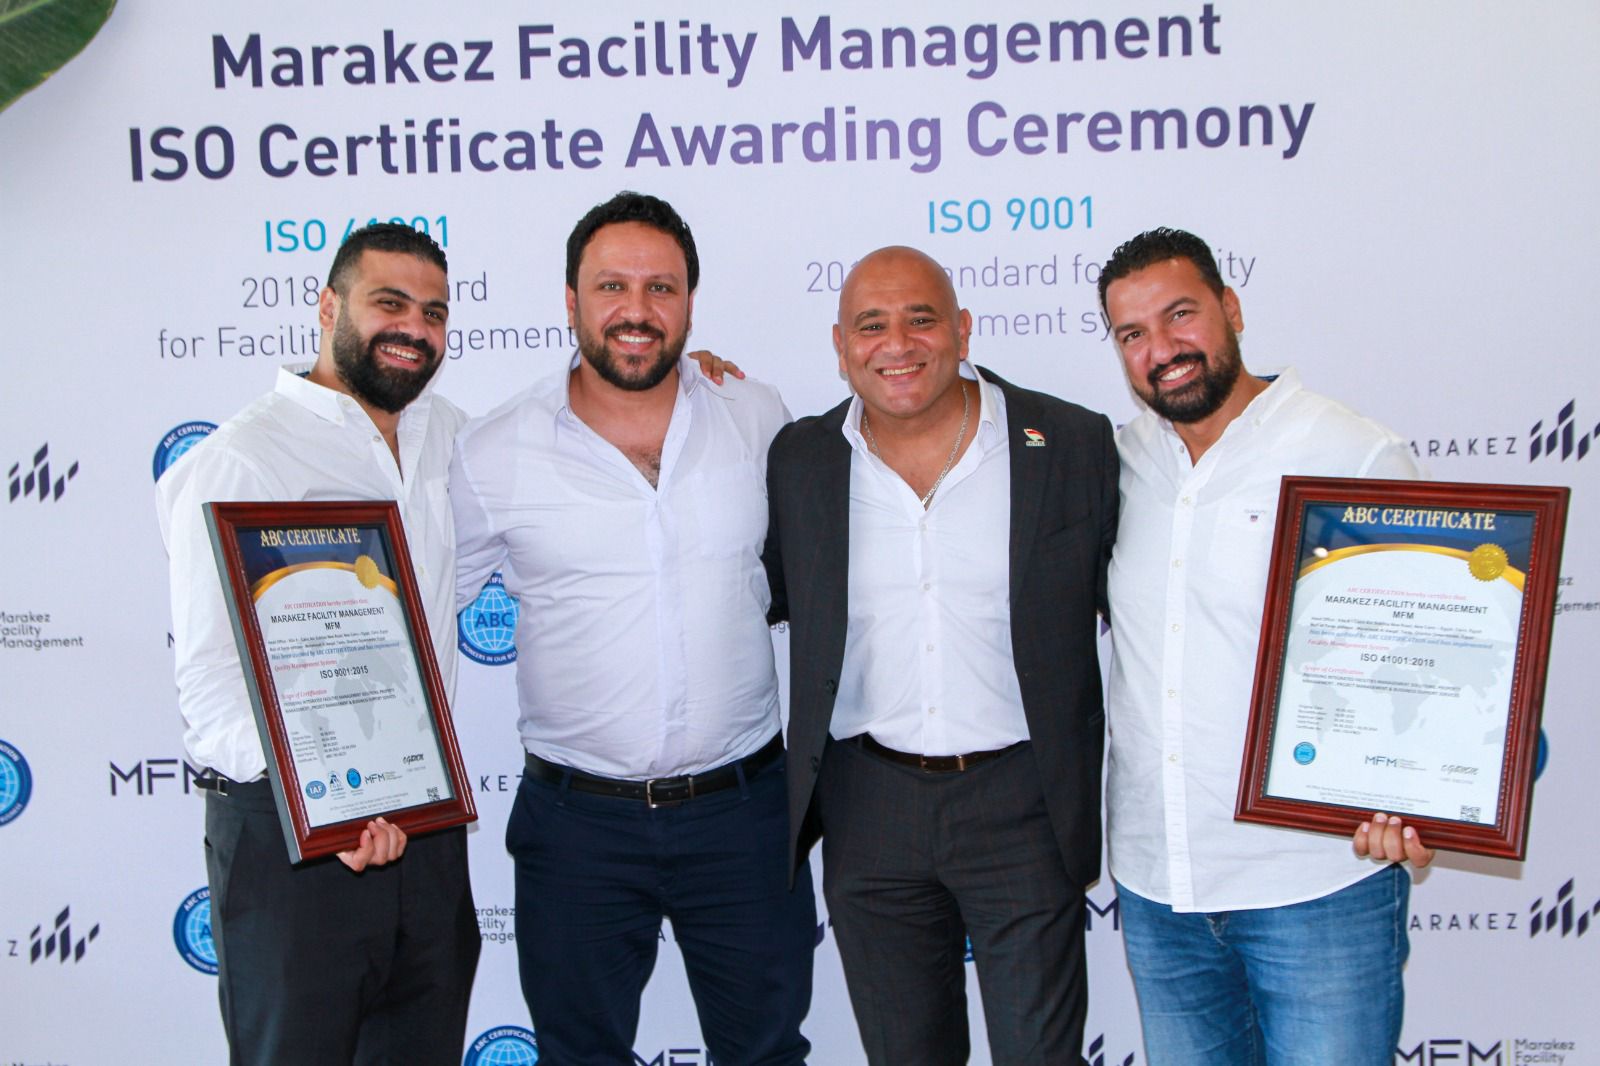 MARAKEZ Introduces Cutting-Edge Facility Management Company, Elevating Standards in Mixed-Use Developments – MARAKEZ FACILITY MANAGEMENT